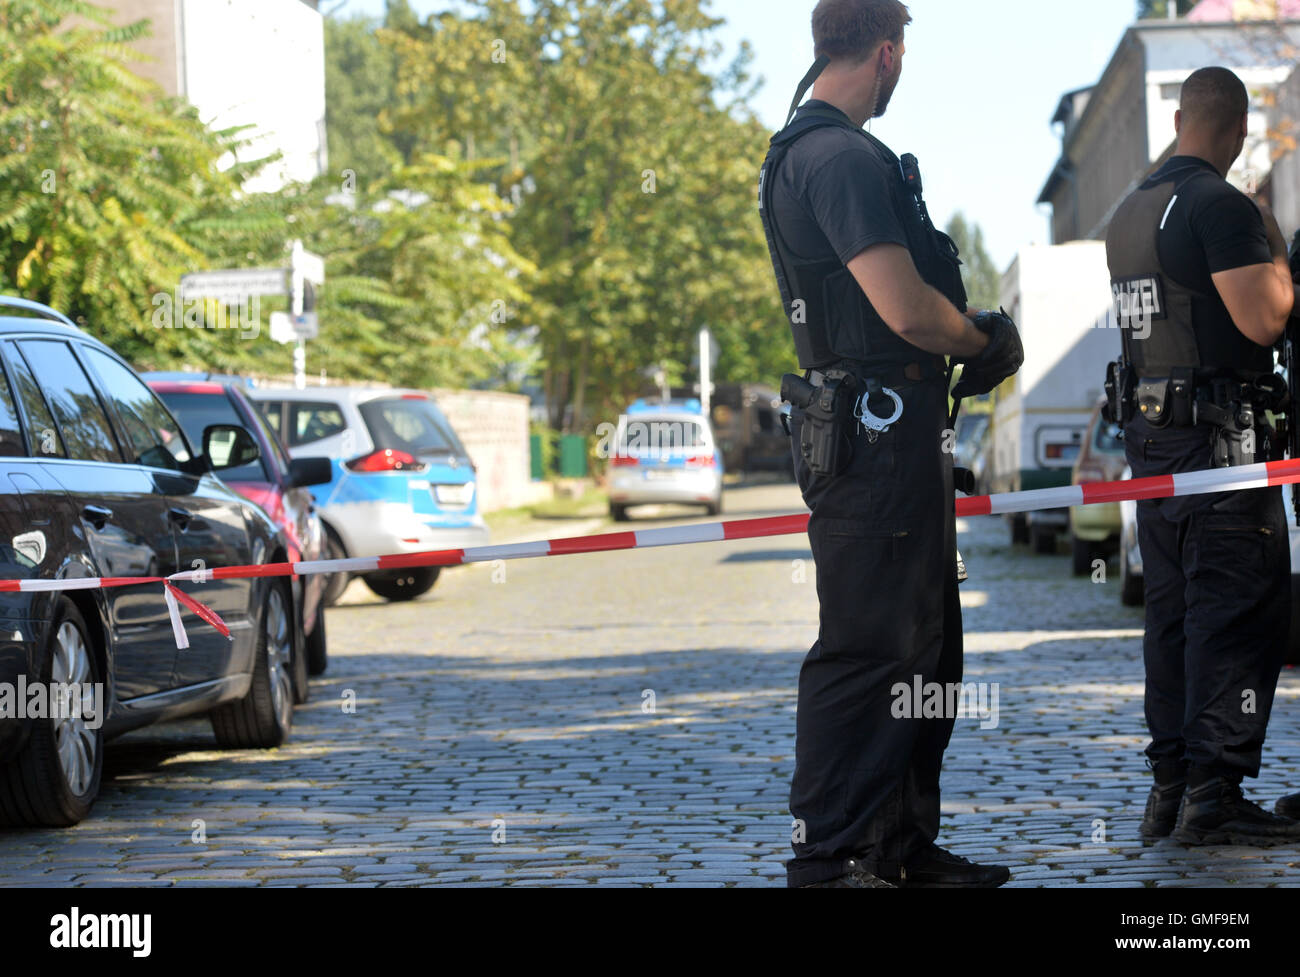 Berlin-Lichtenberg, Germany. 26th Aug, 2016. The police secure a crime scene in Berlin-Lichtenberg, Germany, 26 August 2016. A man was shot here, leaving him mortally injured. Photo: Paul Zinken/dpa/Alamy Live News Stock Photo